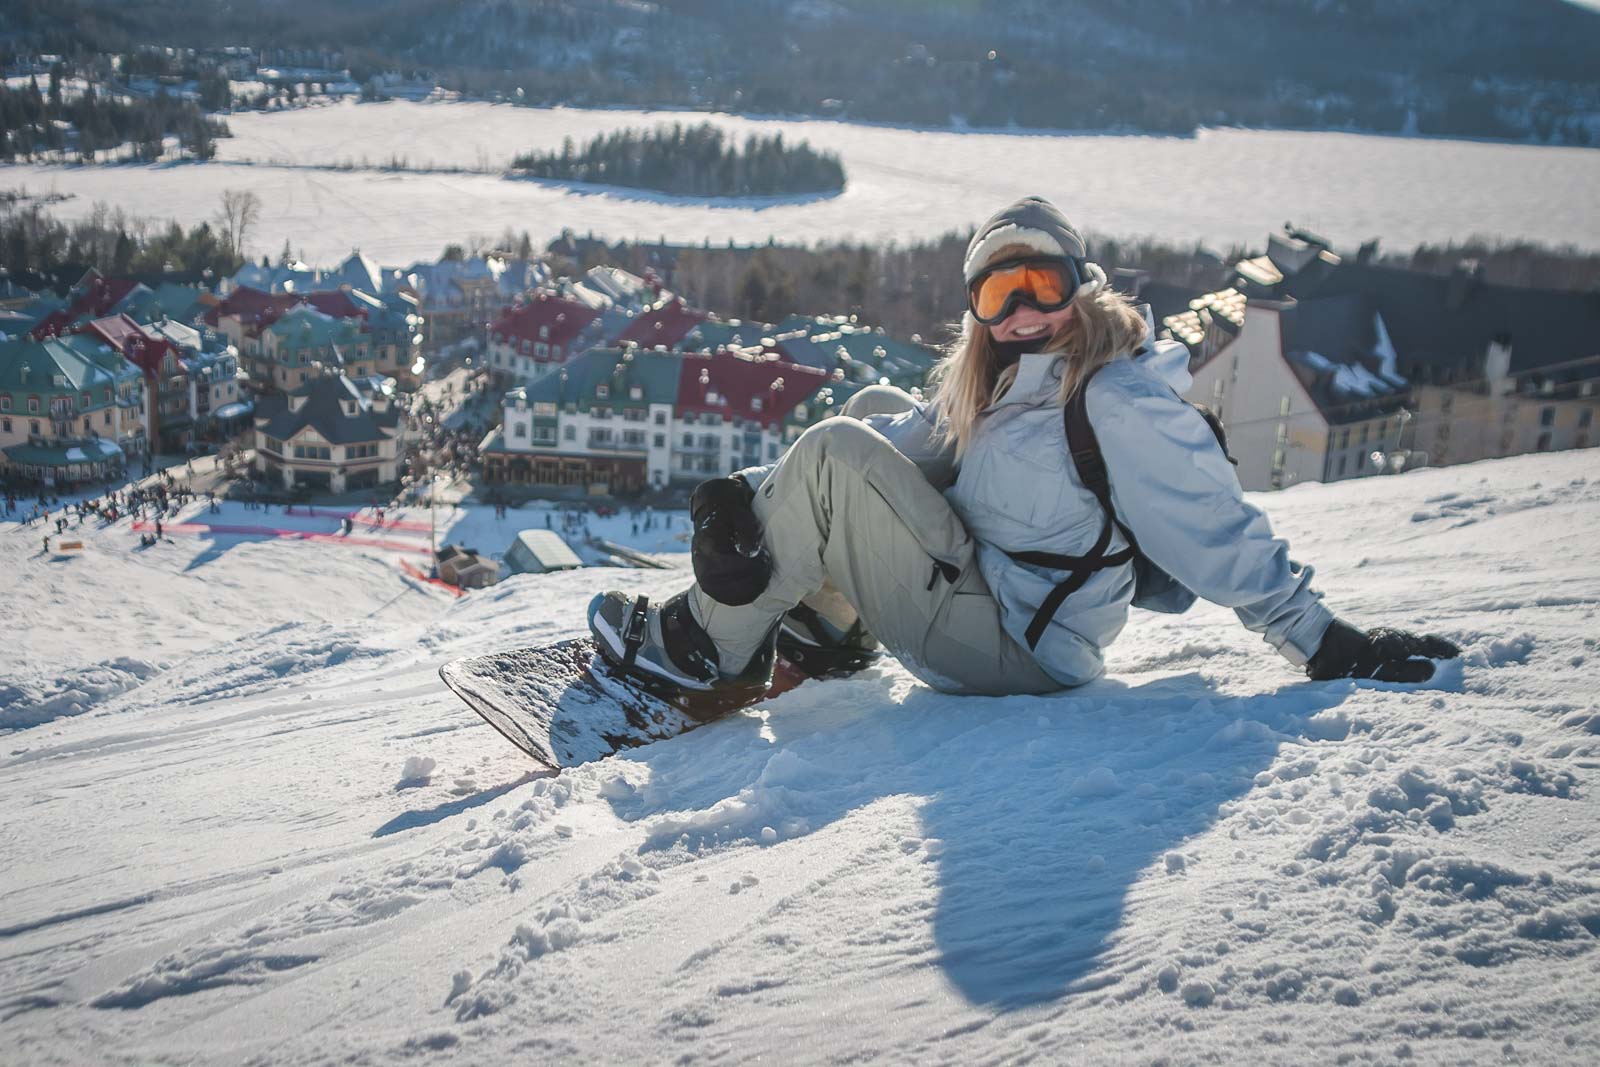 Snowboarding things to do in Mont Tremblant Quebec